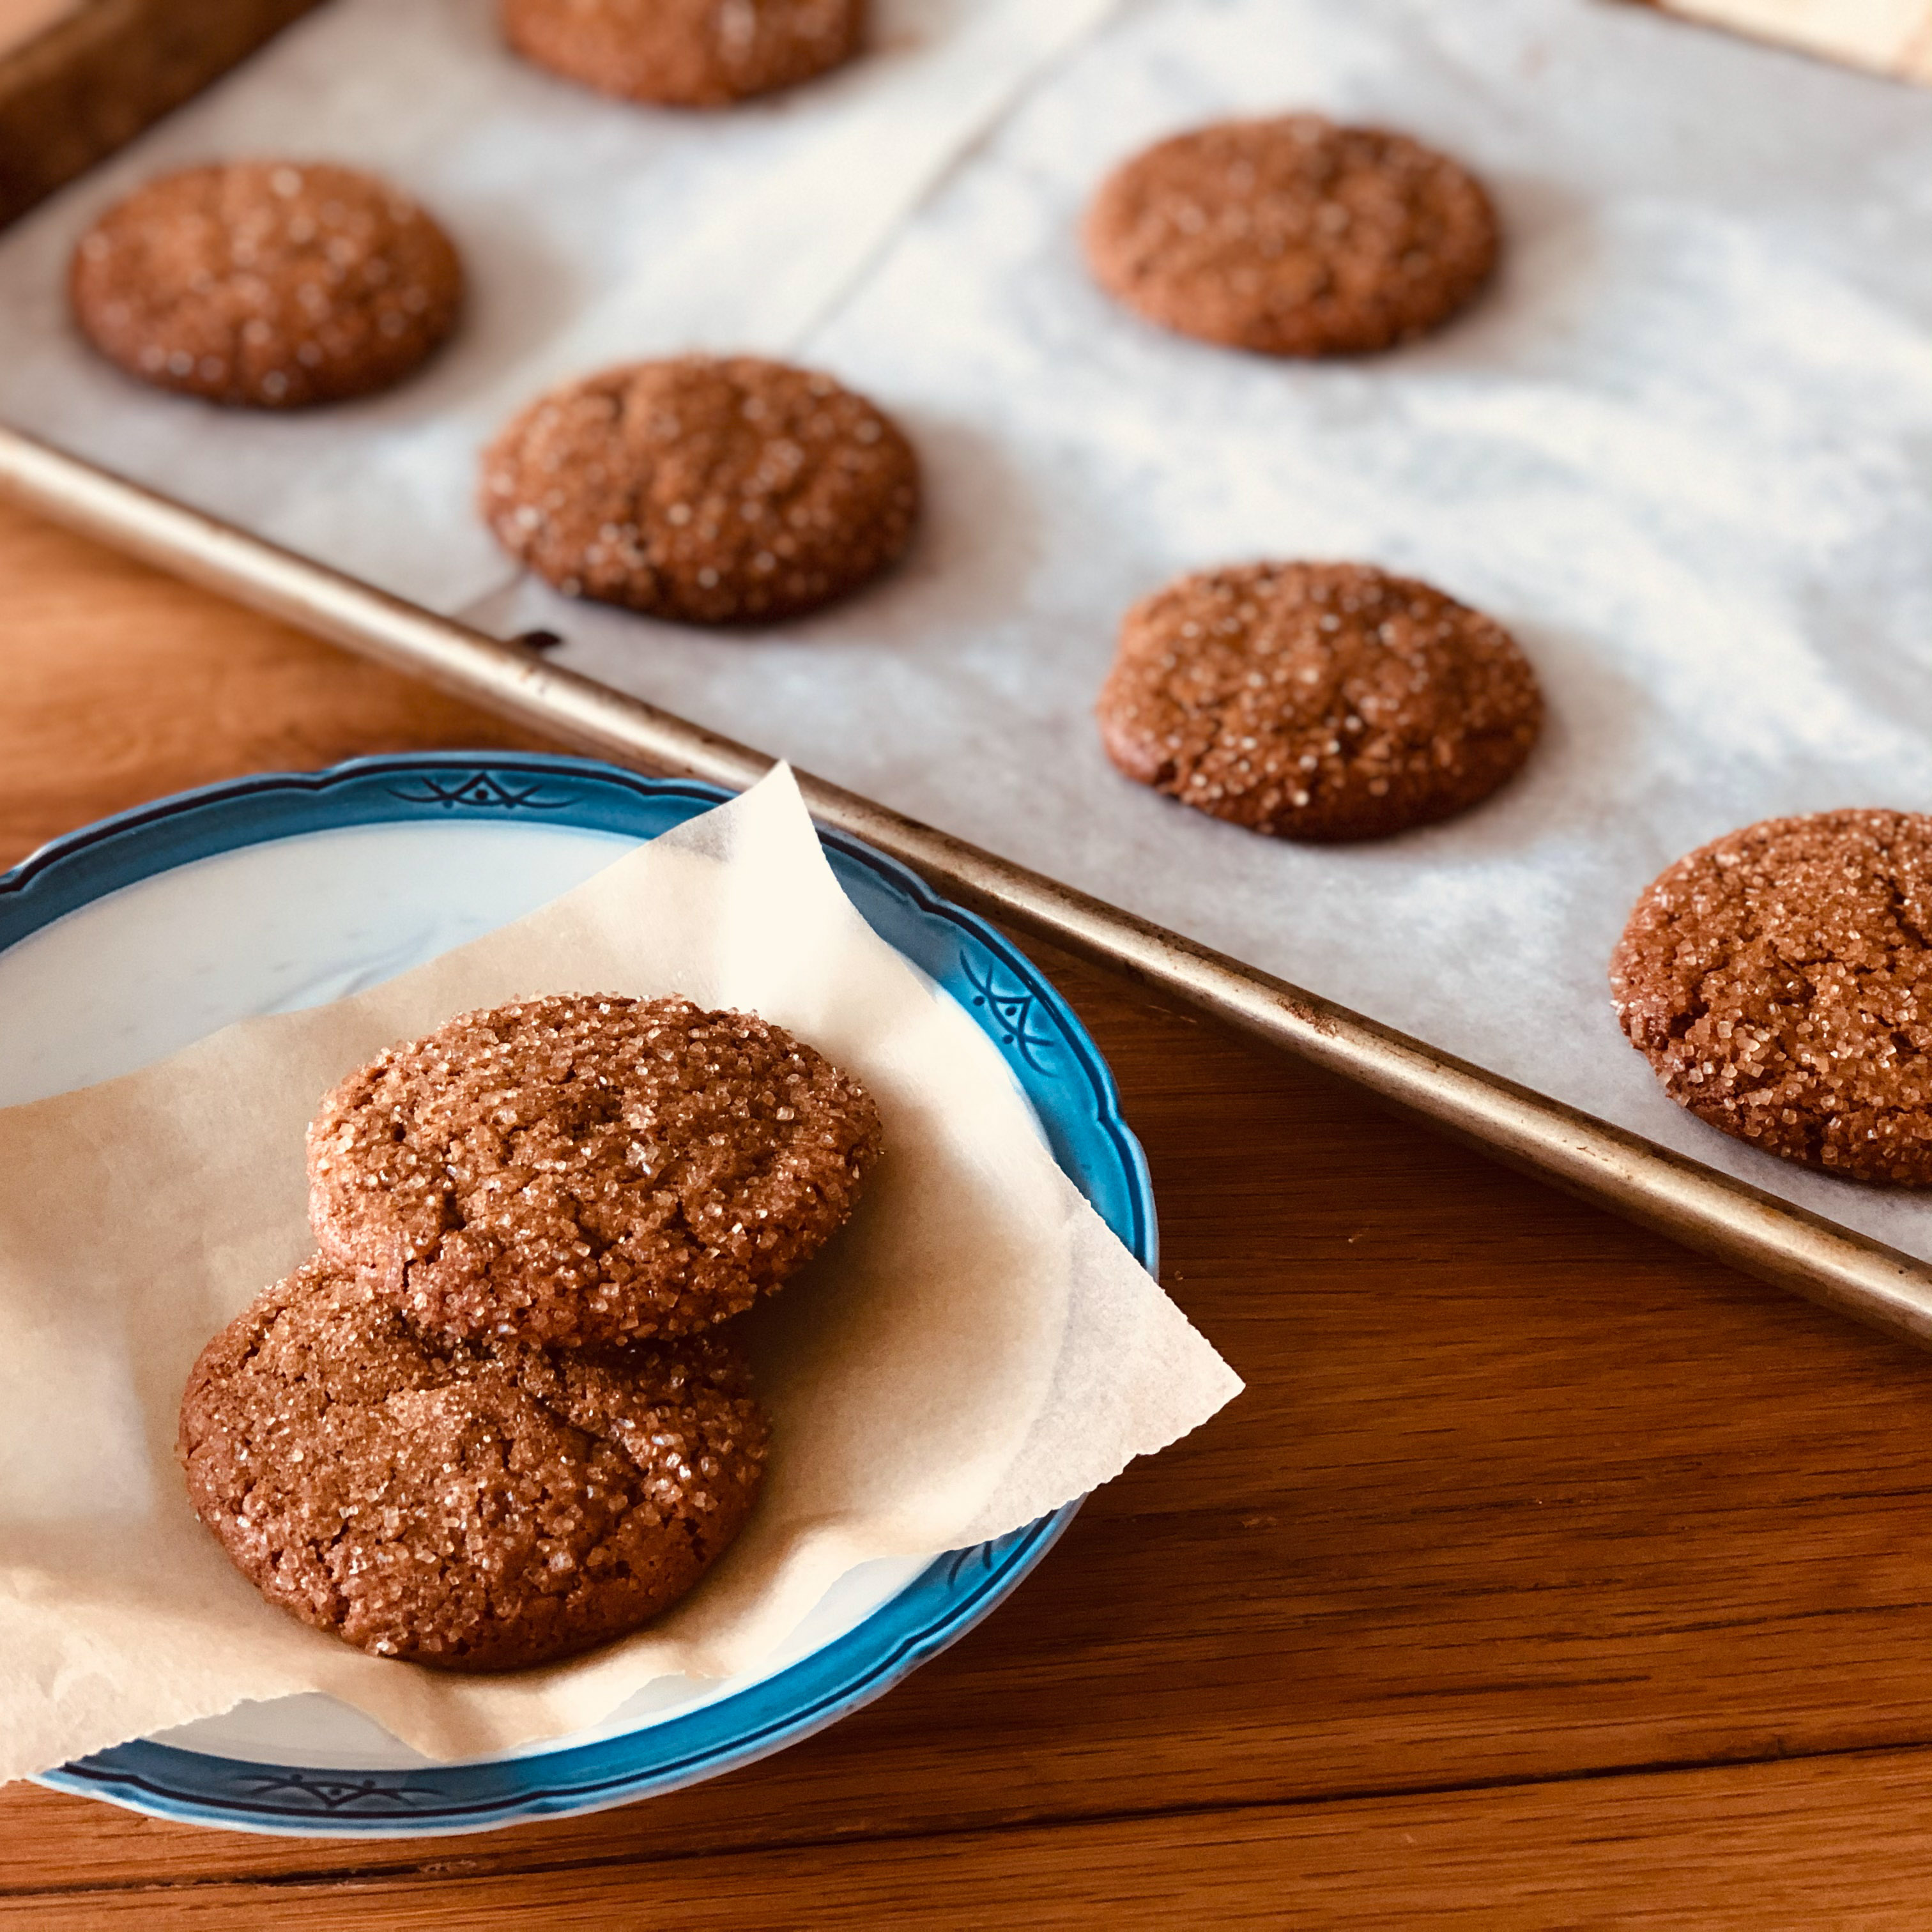 <p>Ginger spice comes through in these chewy vegan cookies made with dried plum puree, which takes the place of butter and eggs.</p>
